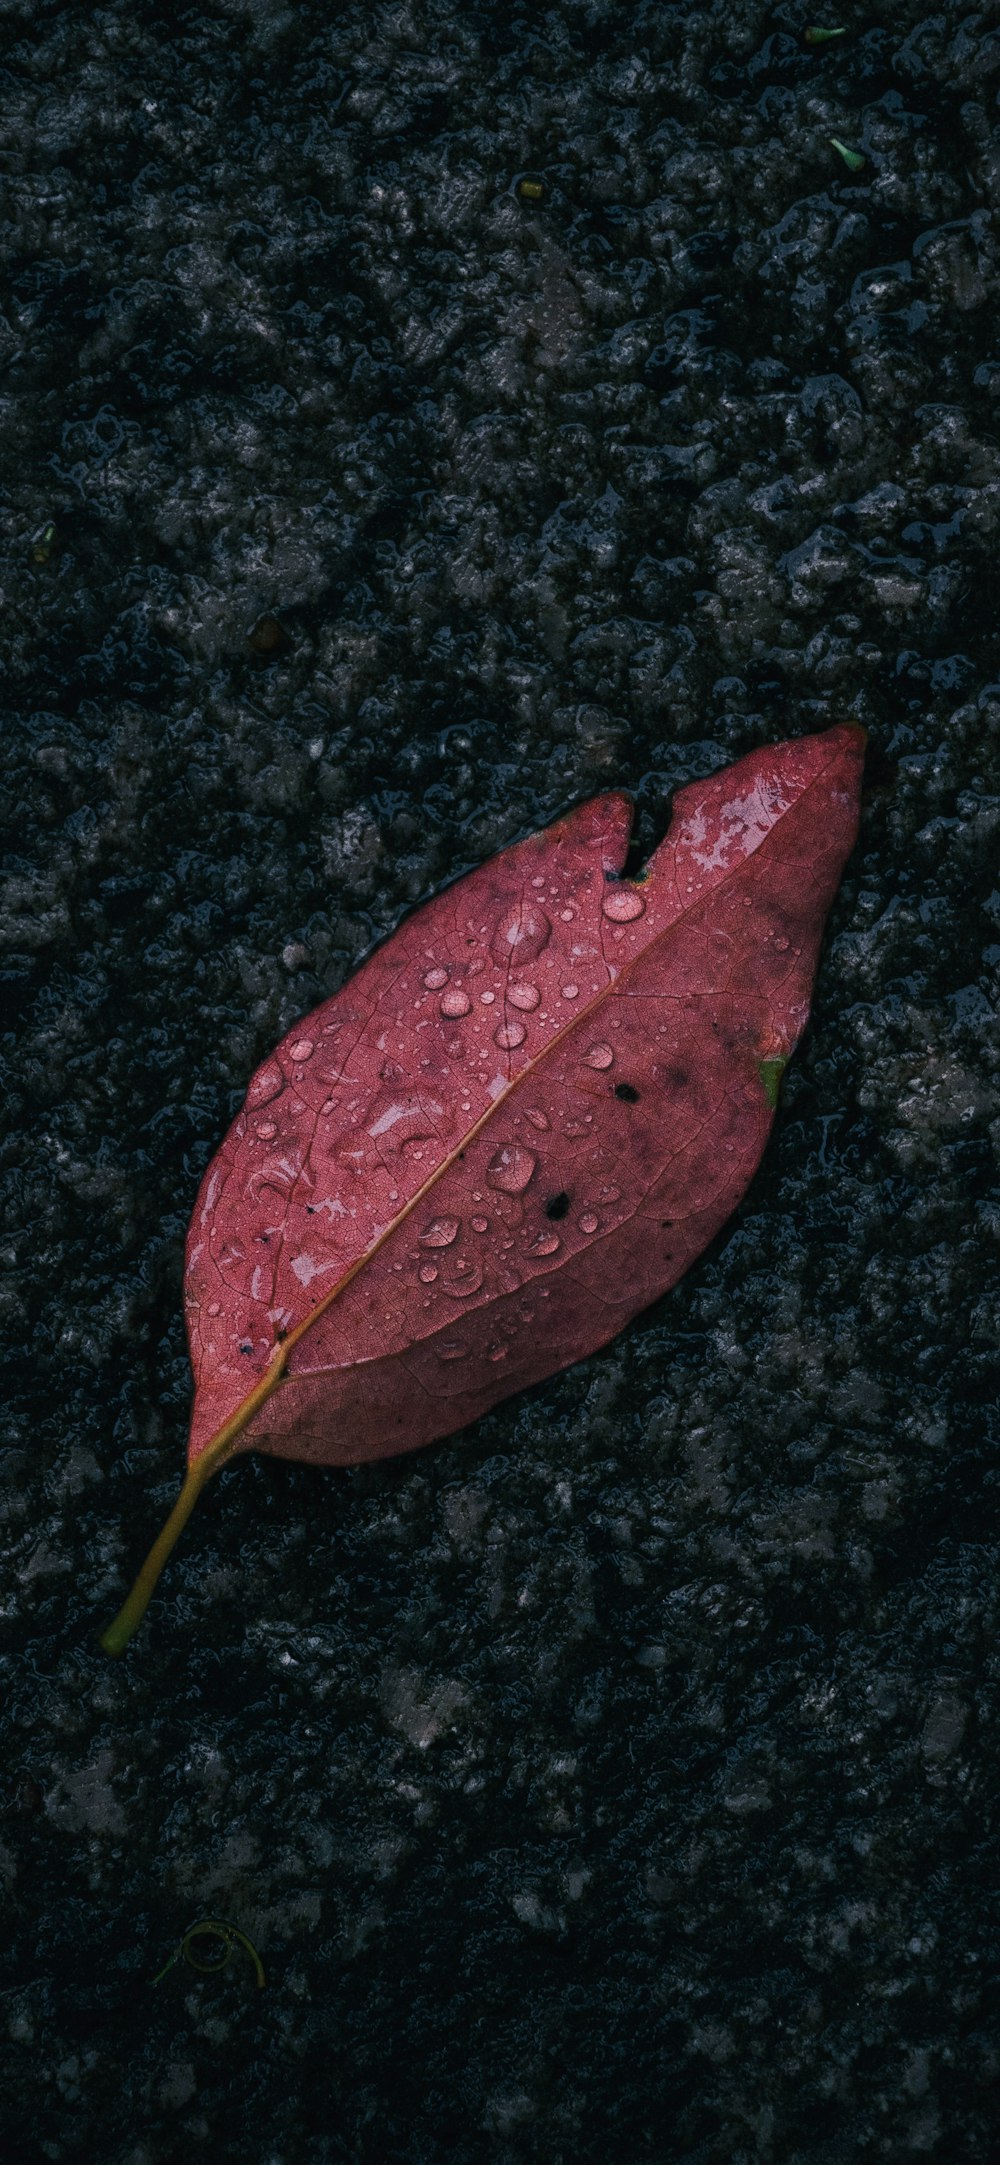 a red leaf with water droplets on it